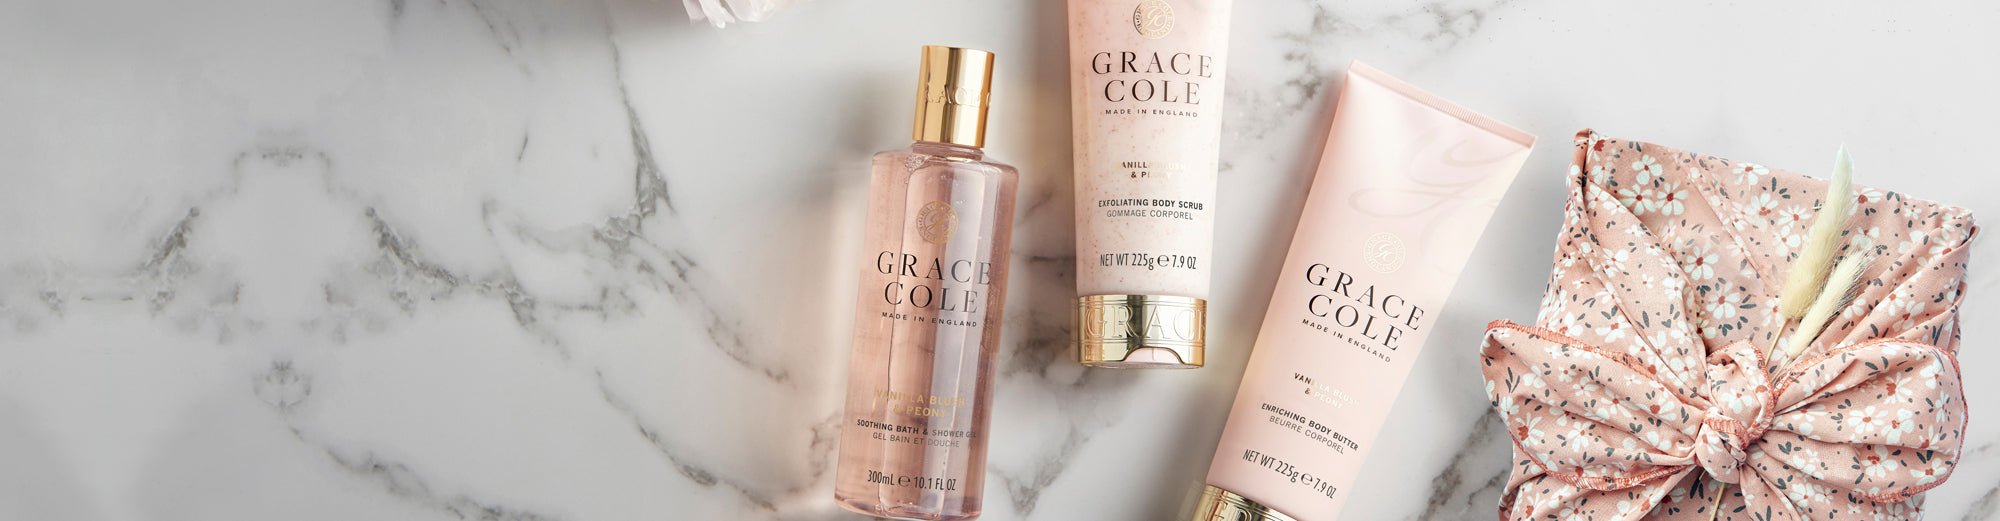 Grace Cole Gifts